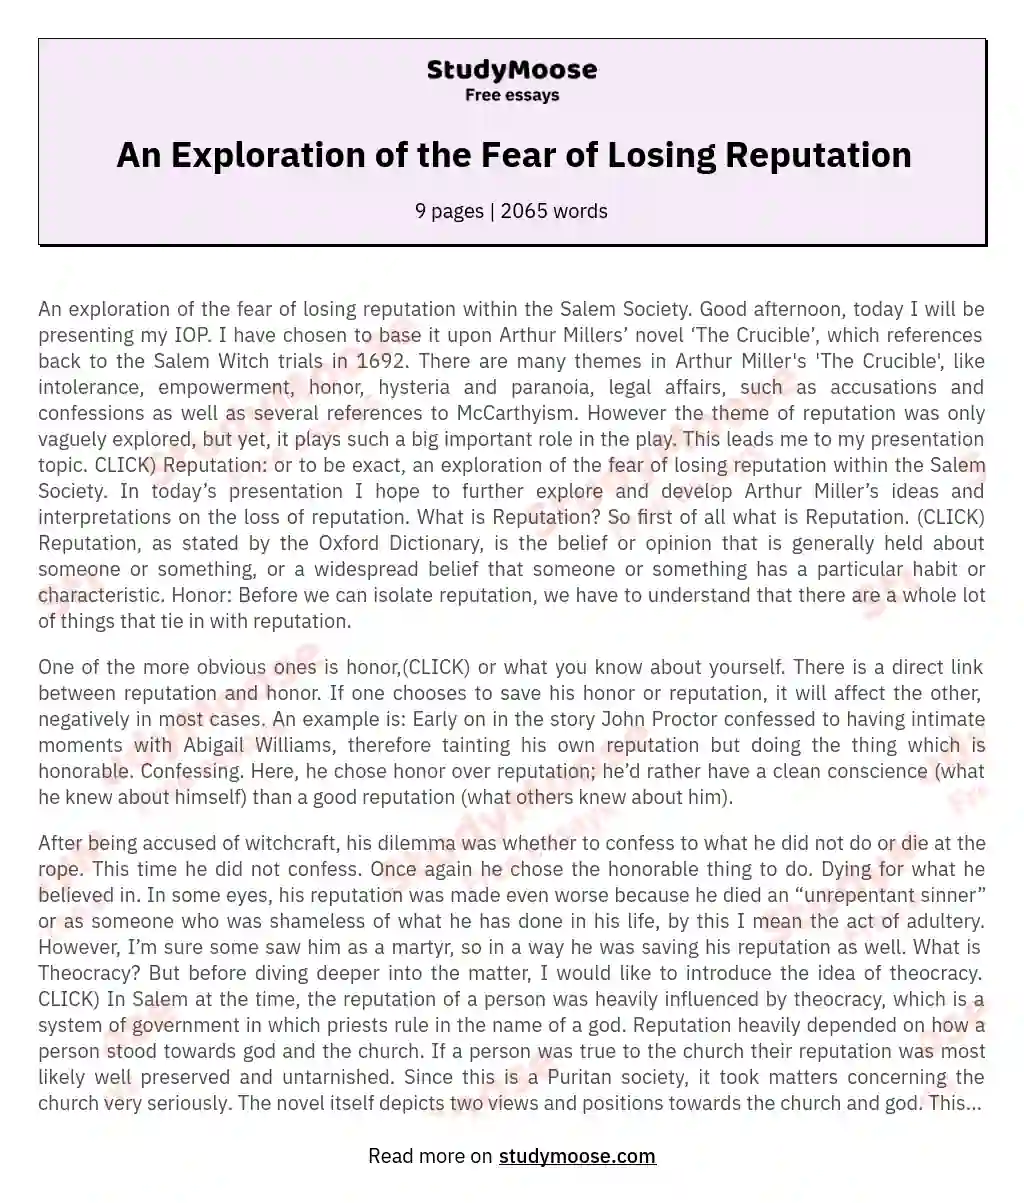 An Exploration of the Fear of Losing Reputation essay